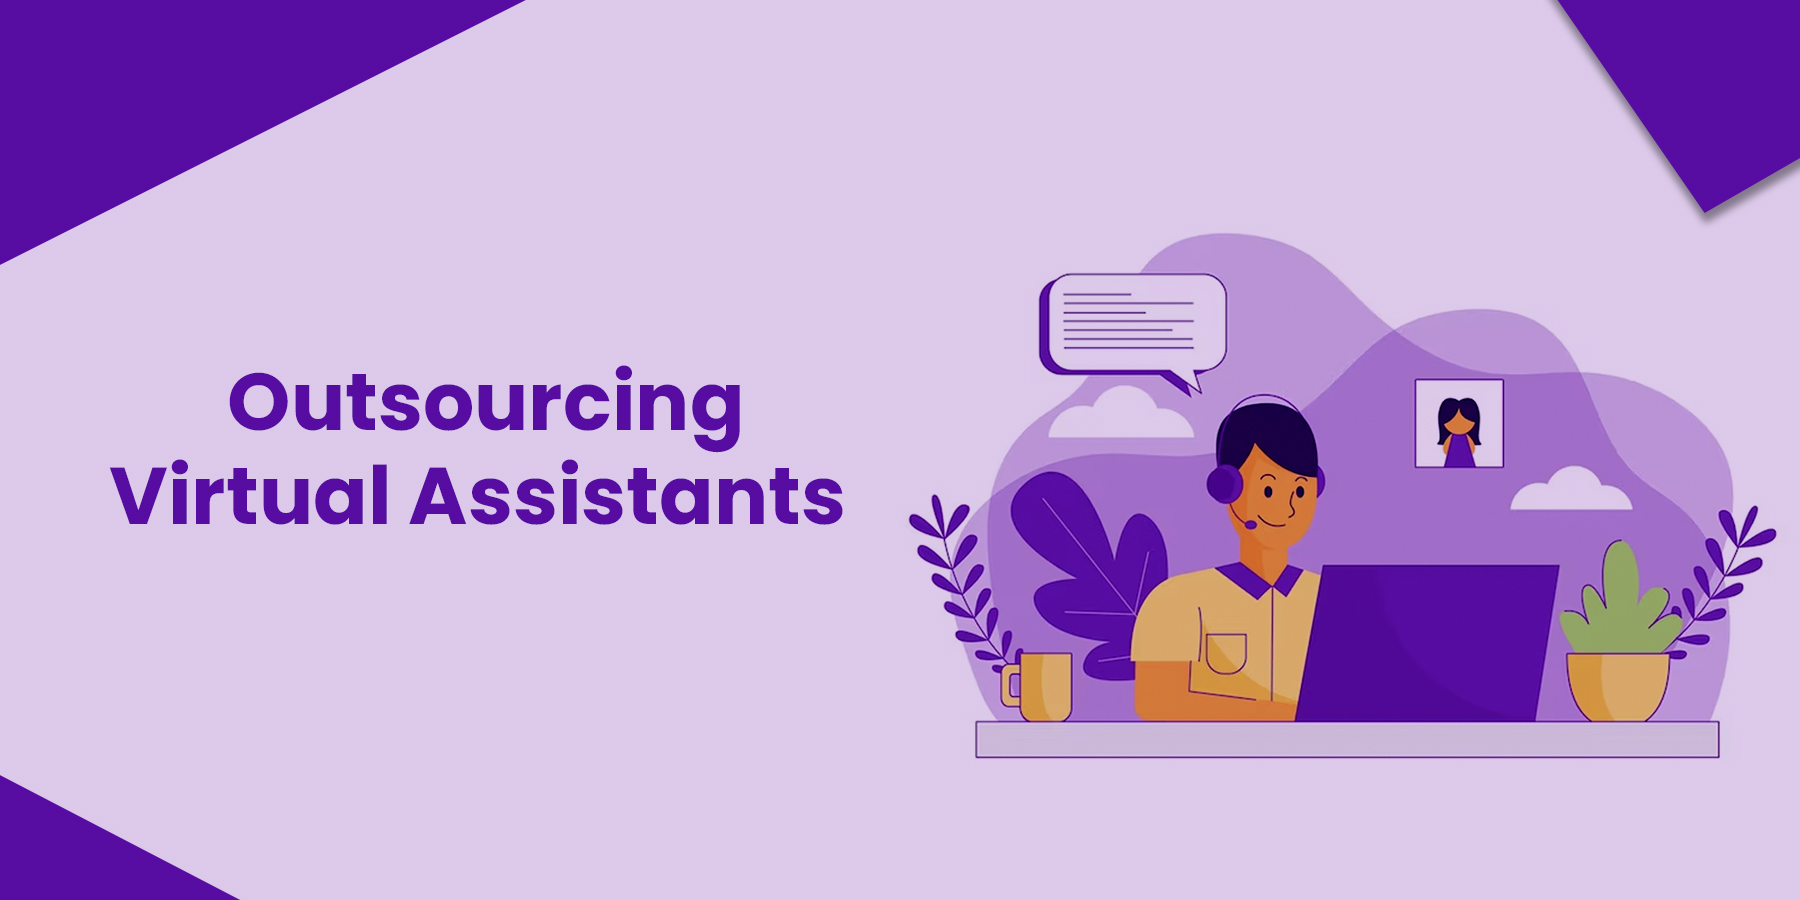 Outsourcing Virtual Assistants